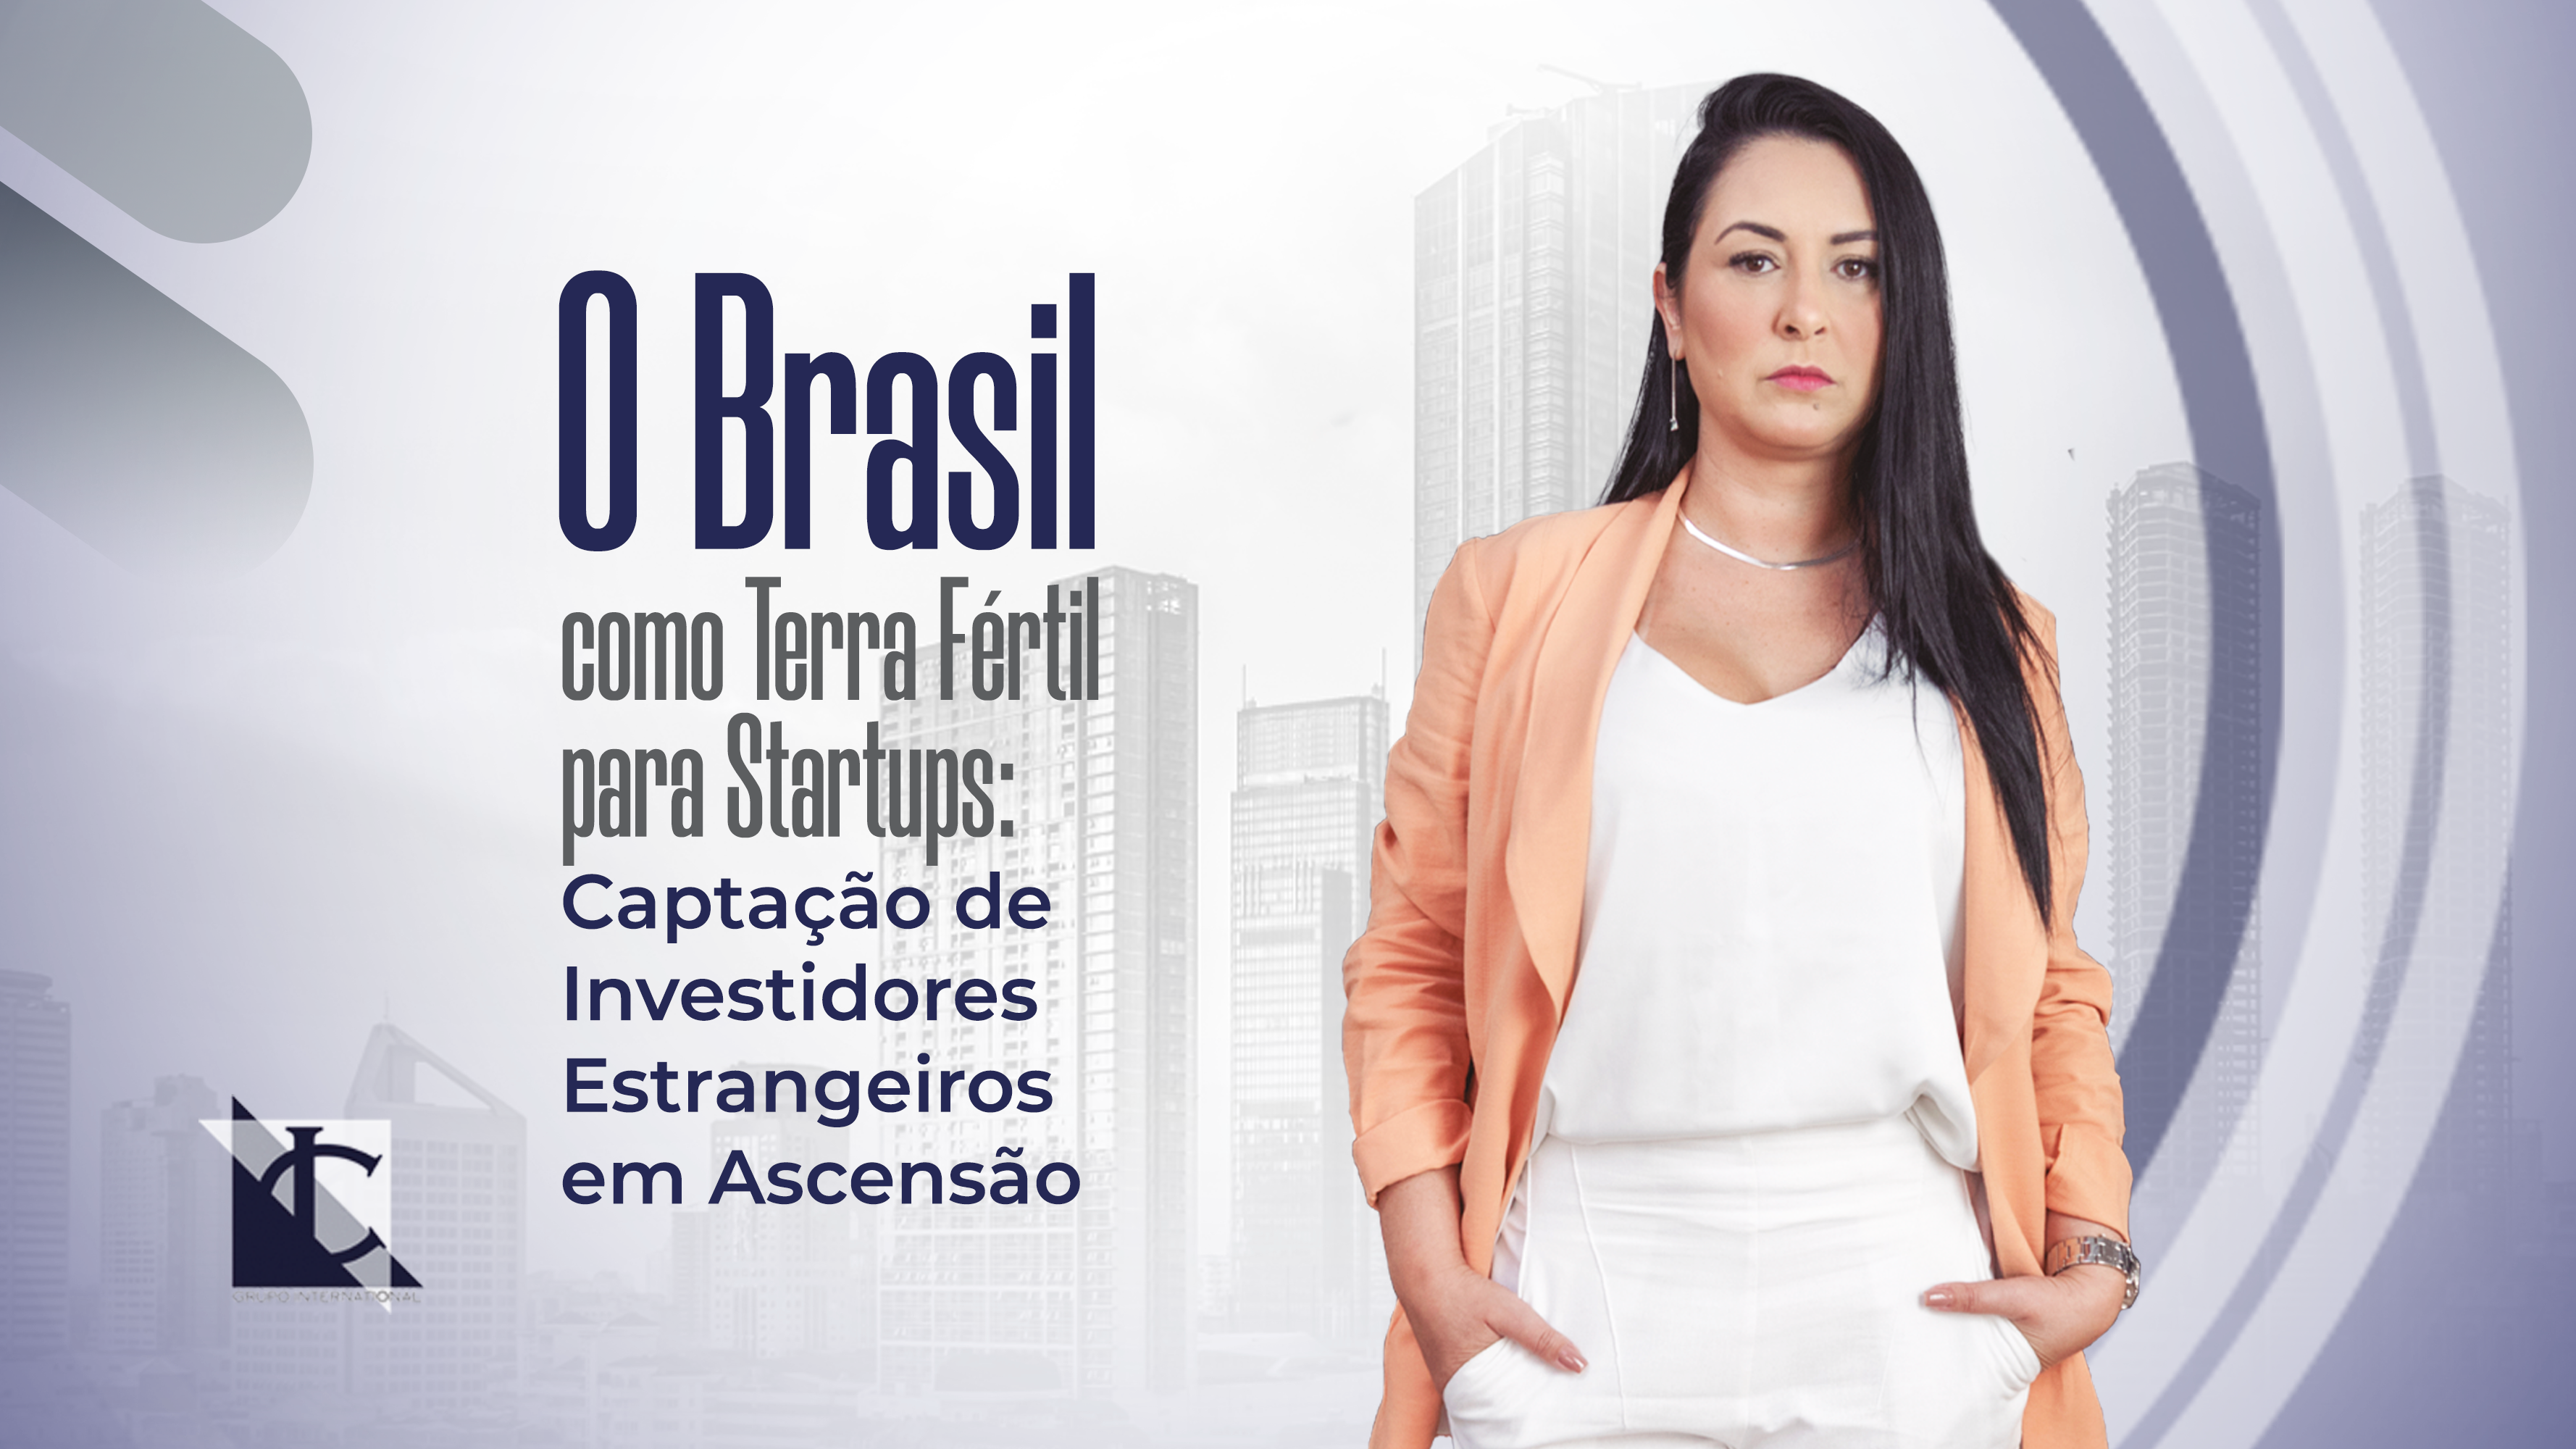 Read more about Brazil as fertile ground for startups: attracting foreign investors on the rise